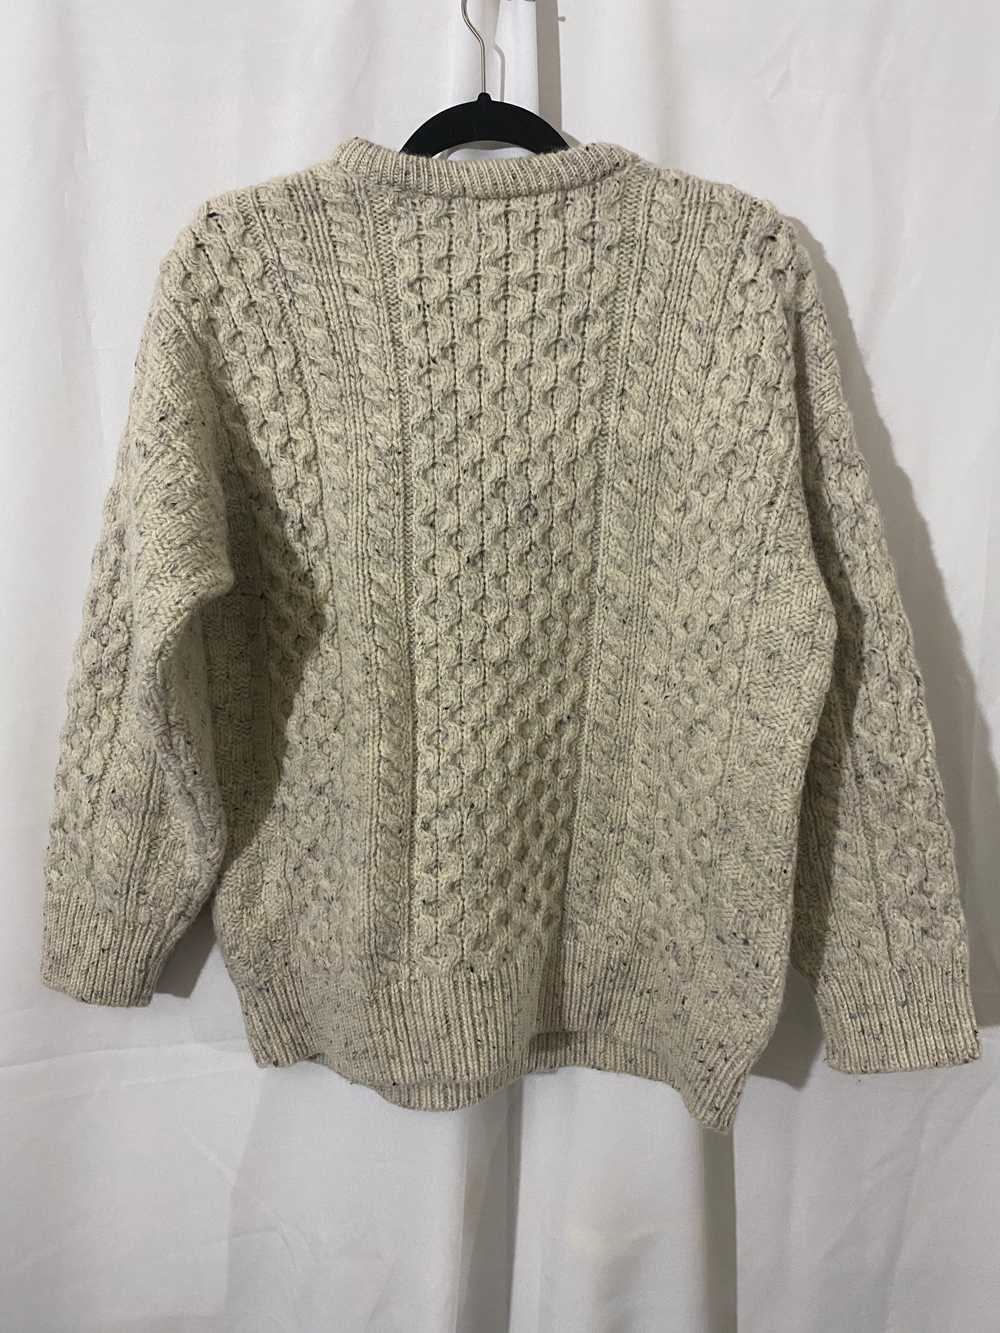 Cream Knit Sweater with Gray Tint - image 2